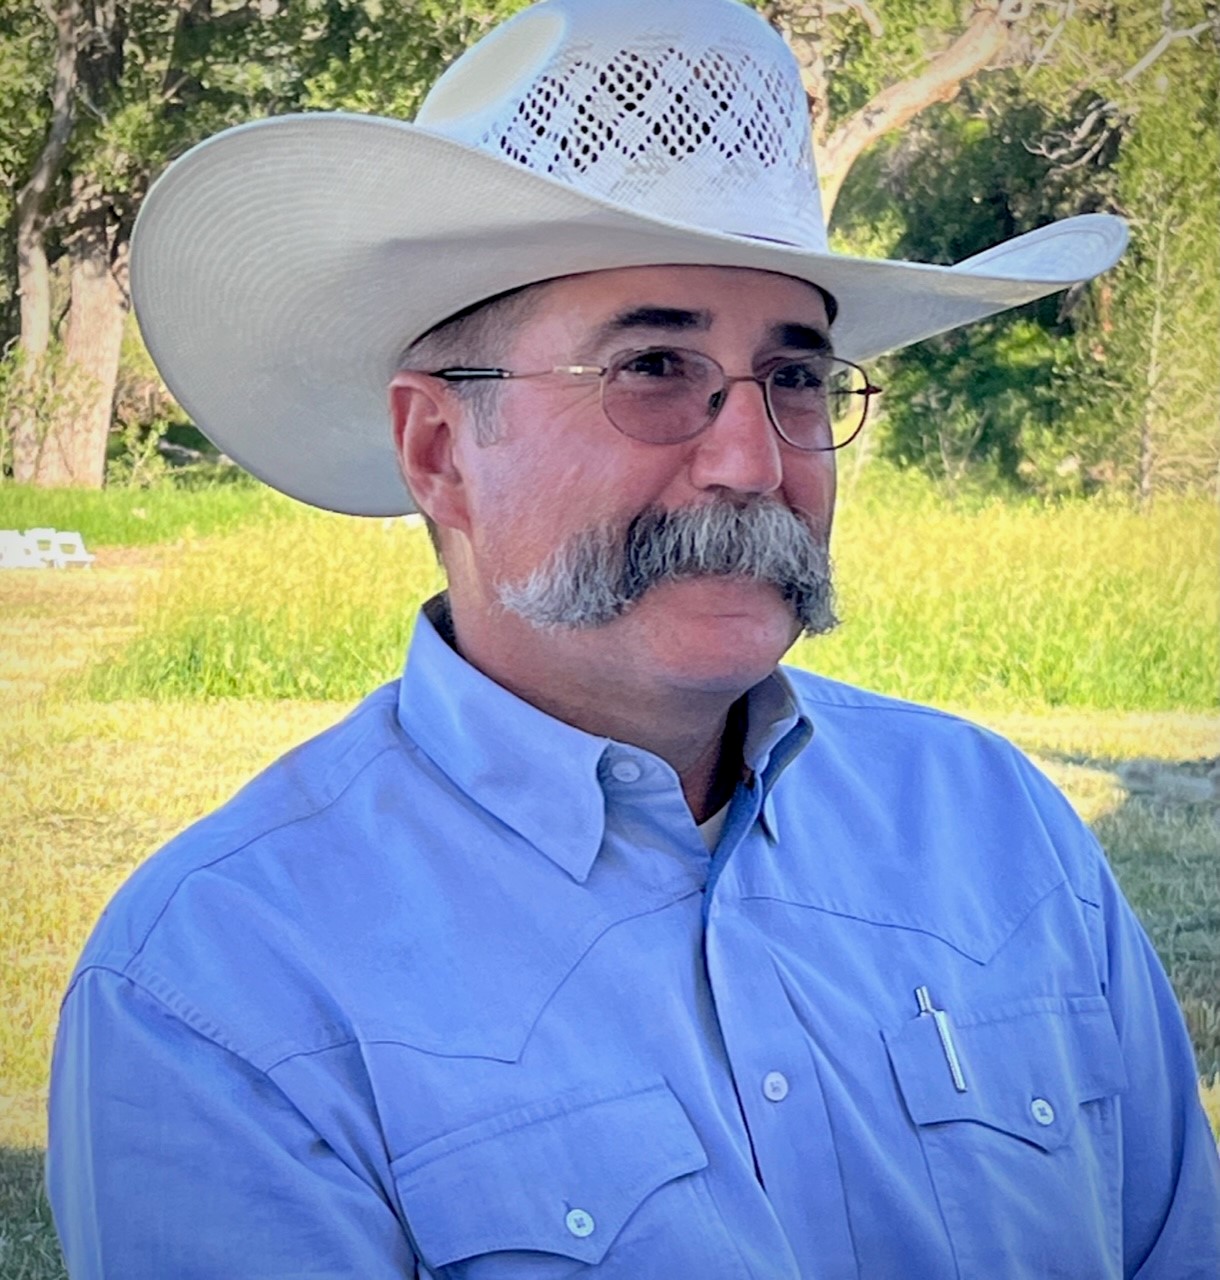 a man with a bushy gray mustache and wire-rimmed glasses is wearing a straw cowboy hat and a blue oxford shirt